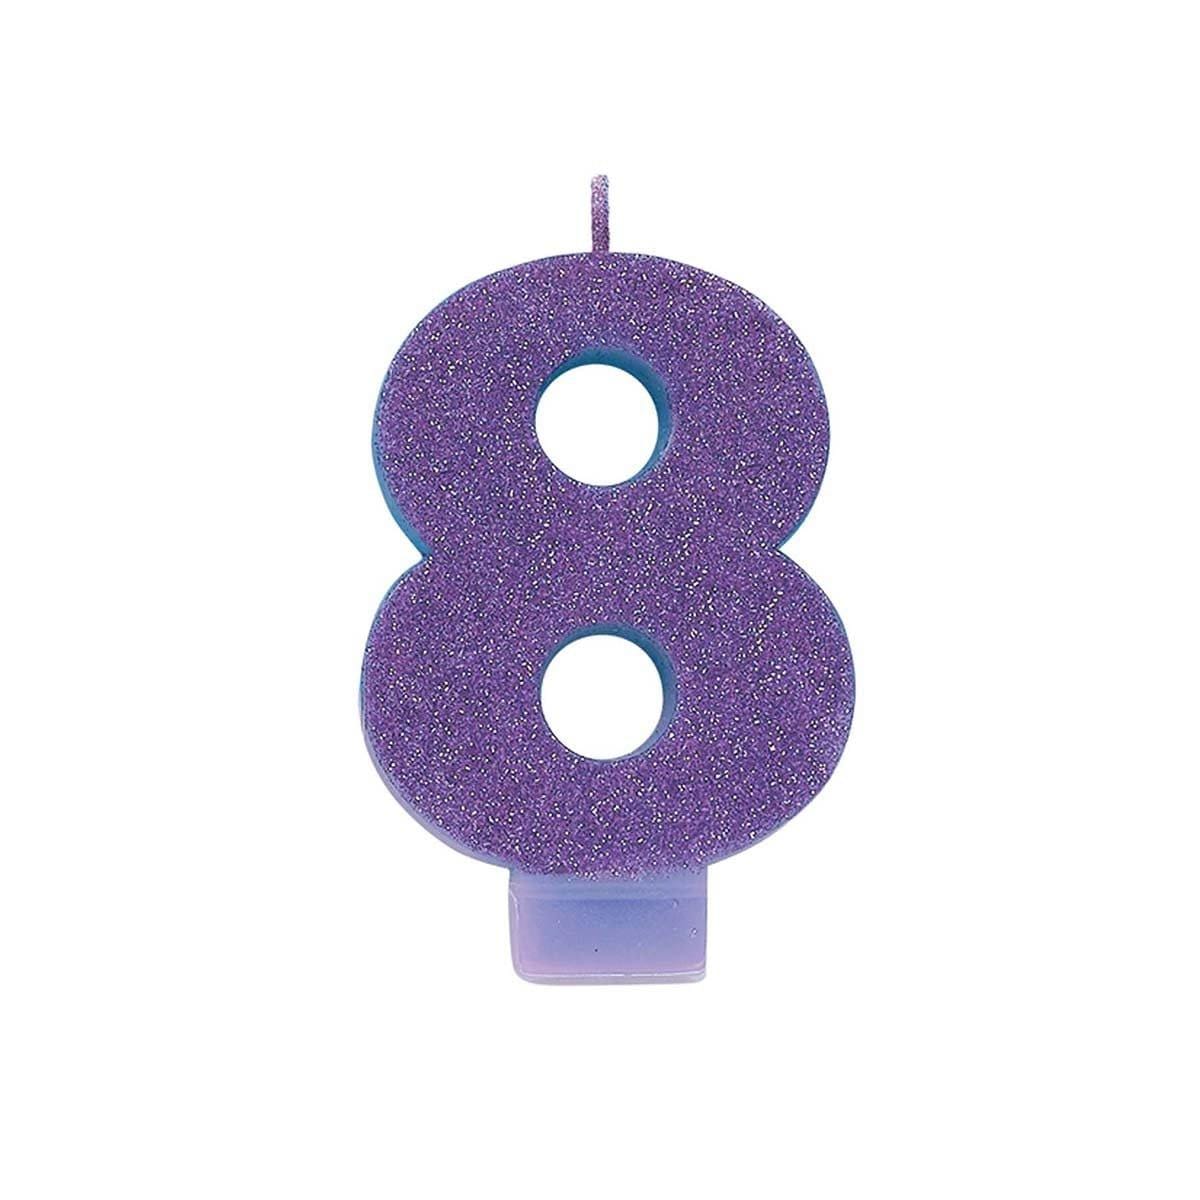 Buy Cake Supplies Numeral Glitter Candle #8 - Purple sold at Party Expert